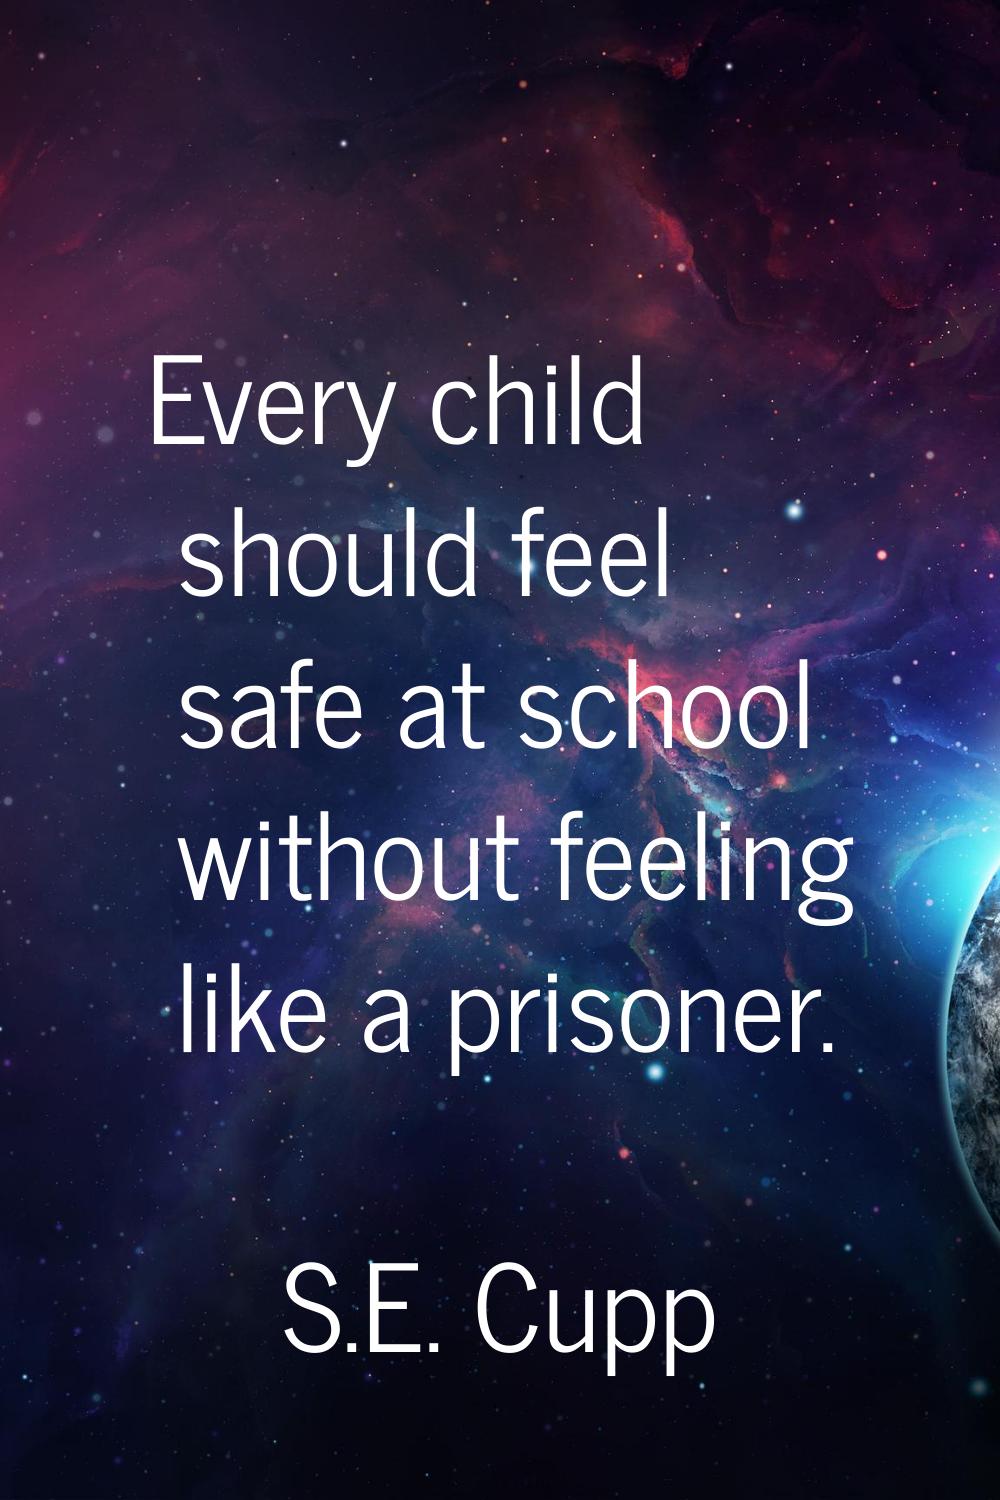 Every child should feel safe at school without feeling like a prisoner.